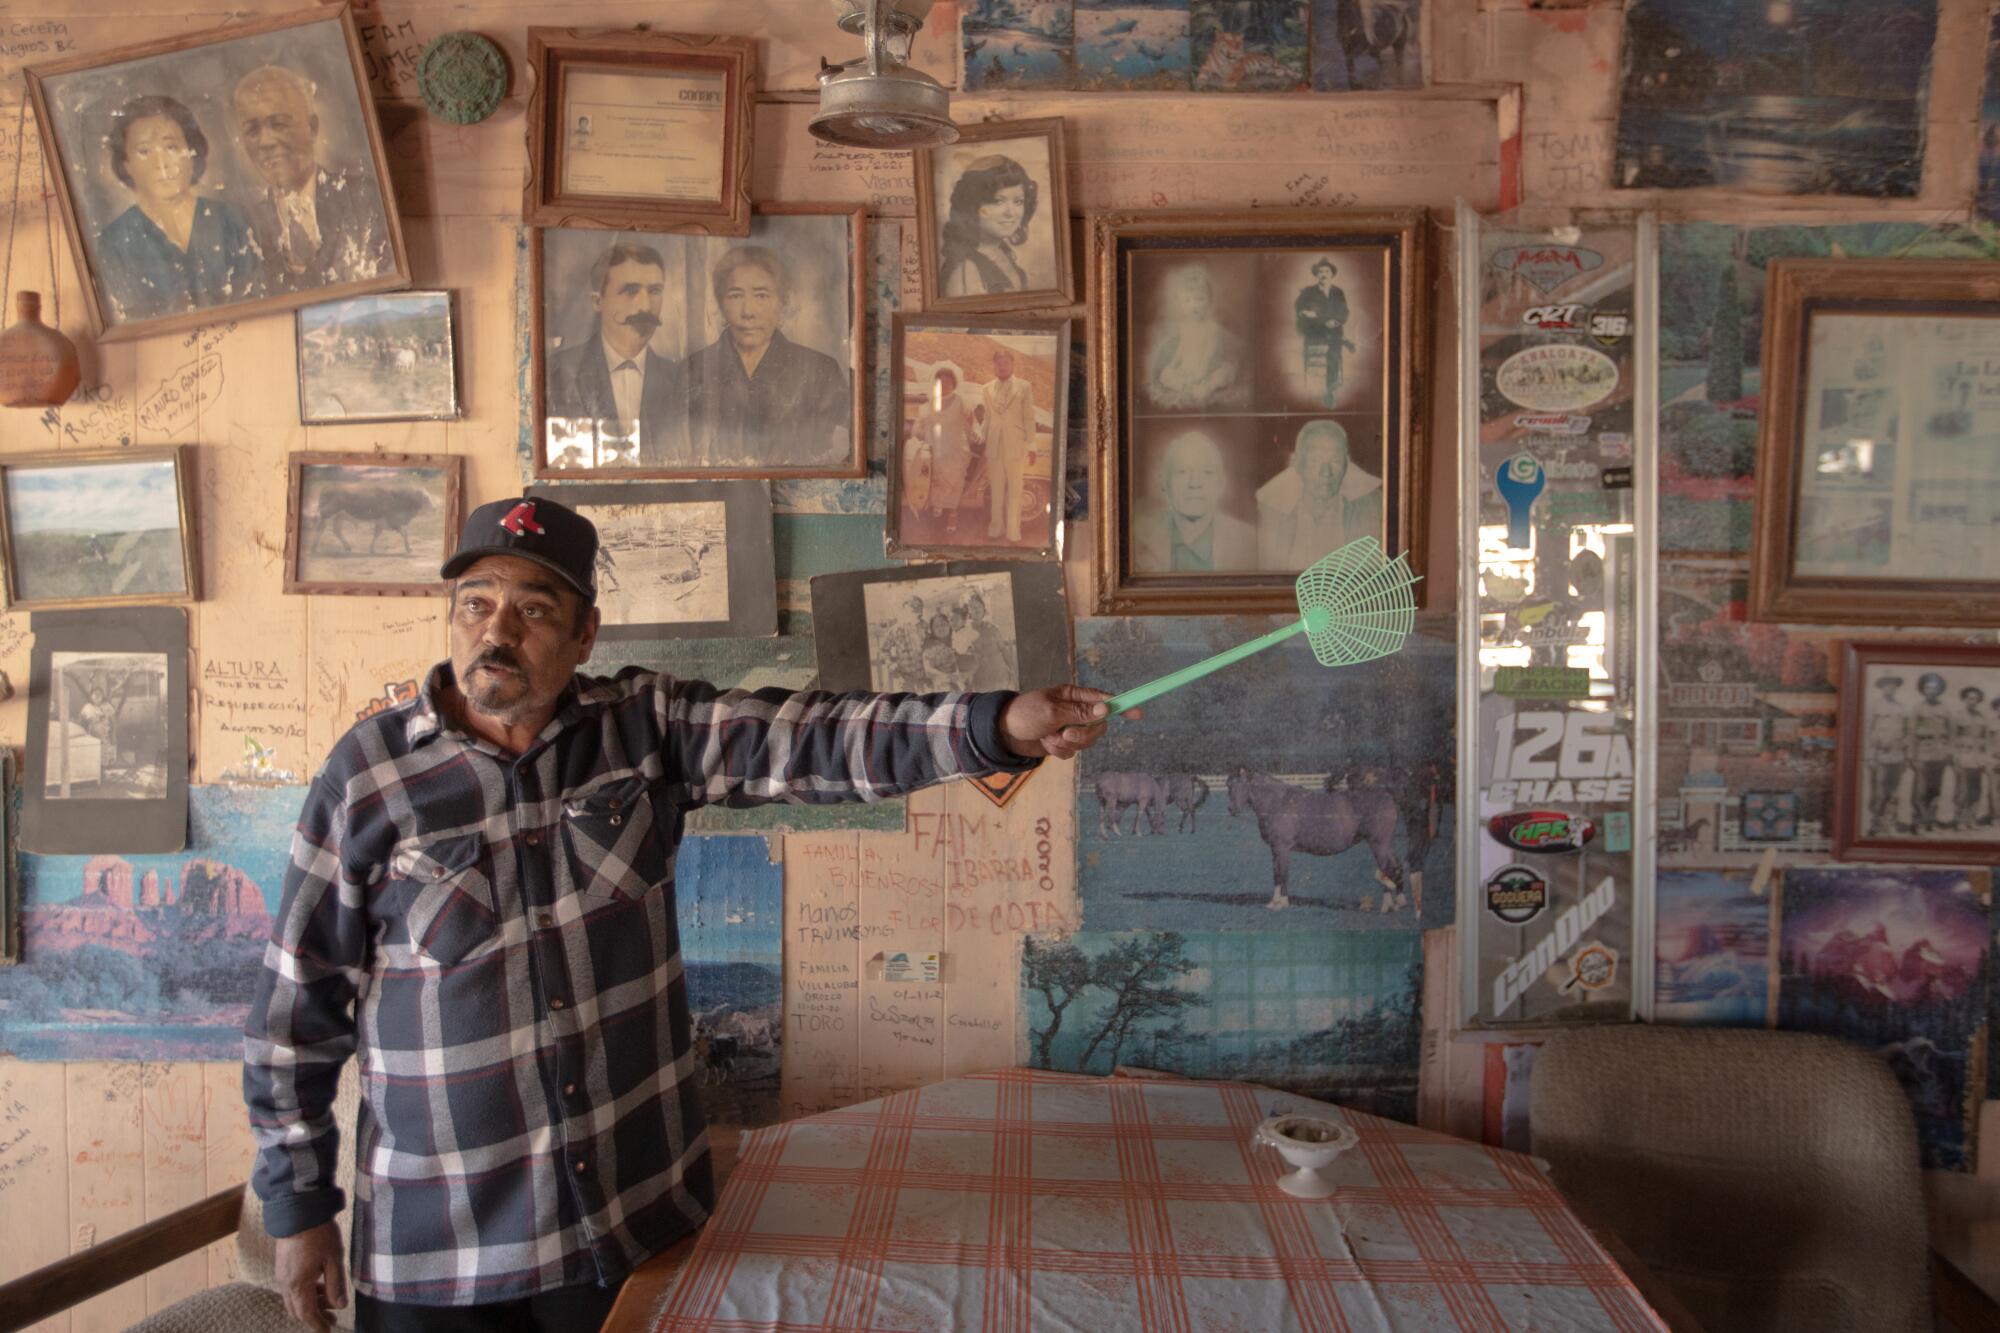 A man holding a fly swatter, in front of a wall covered in old family photos.